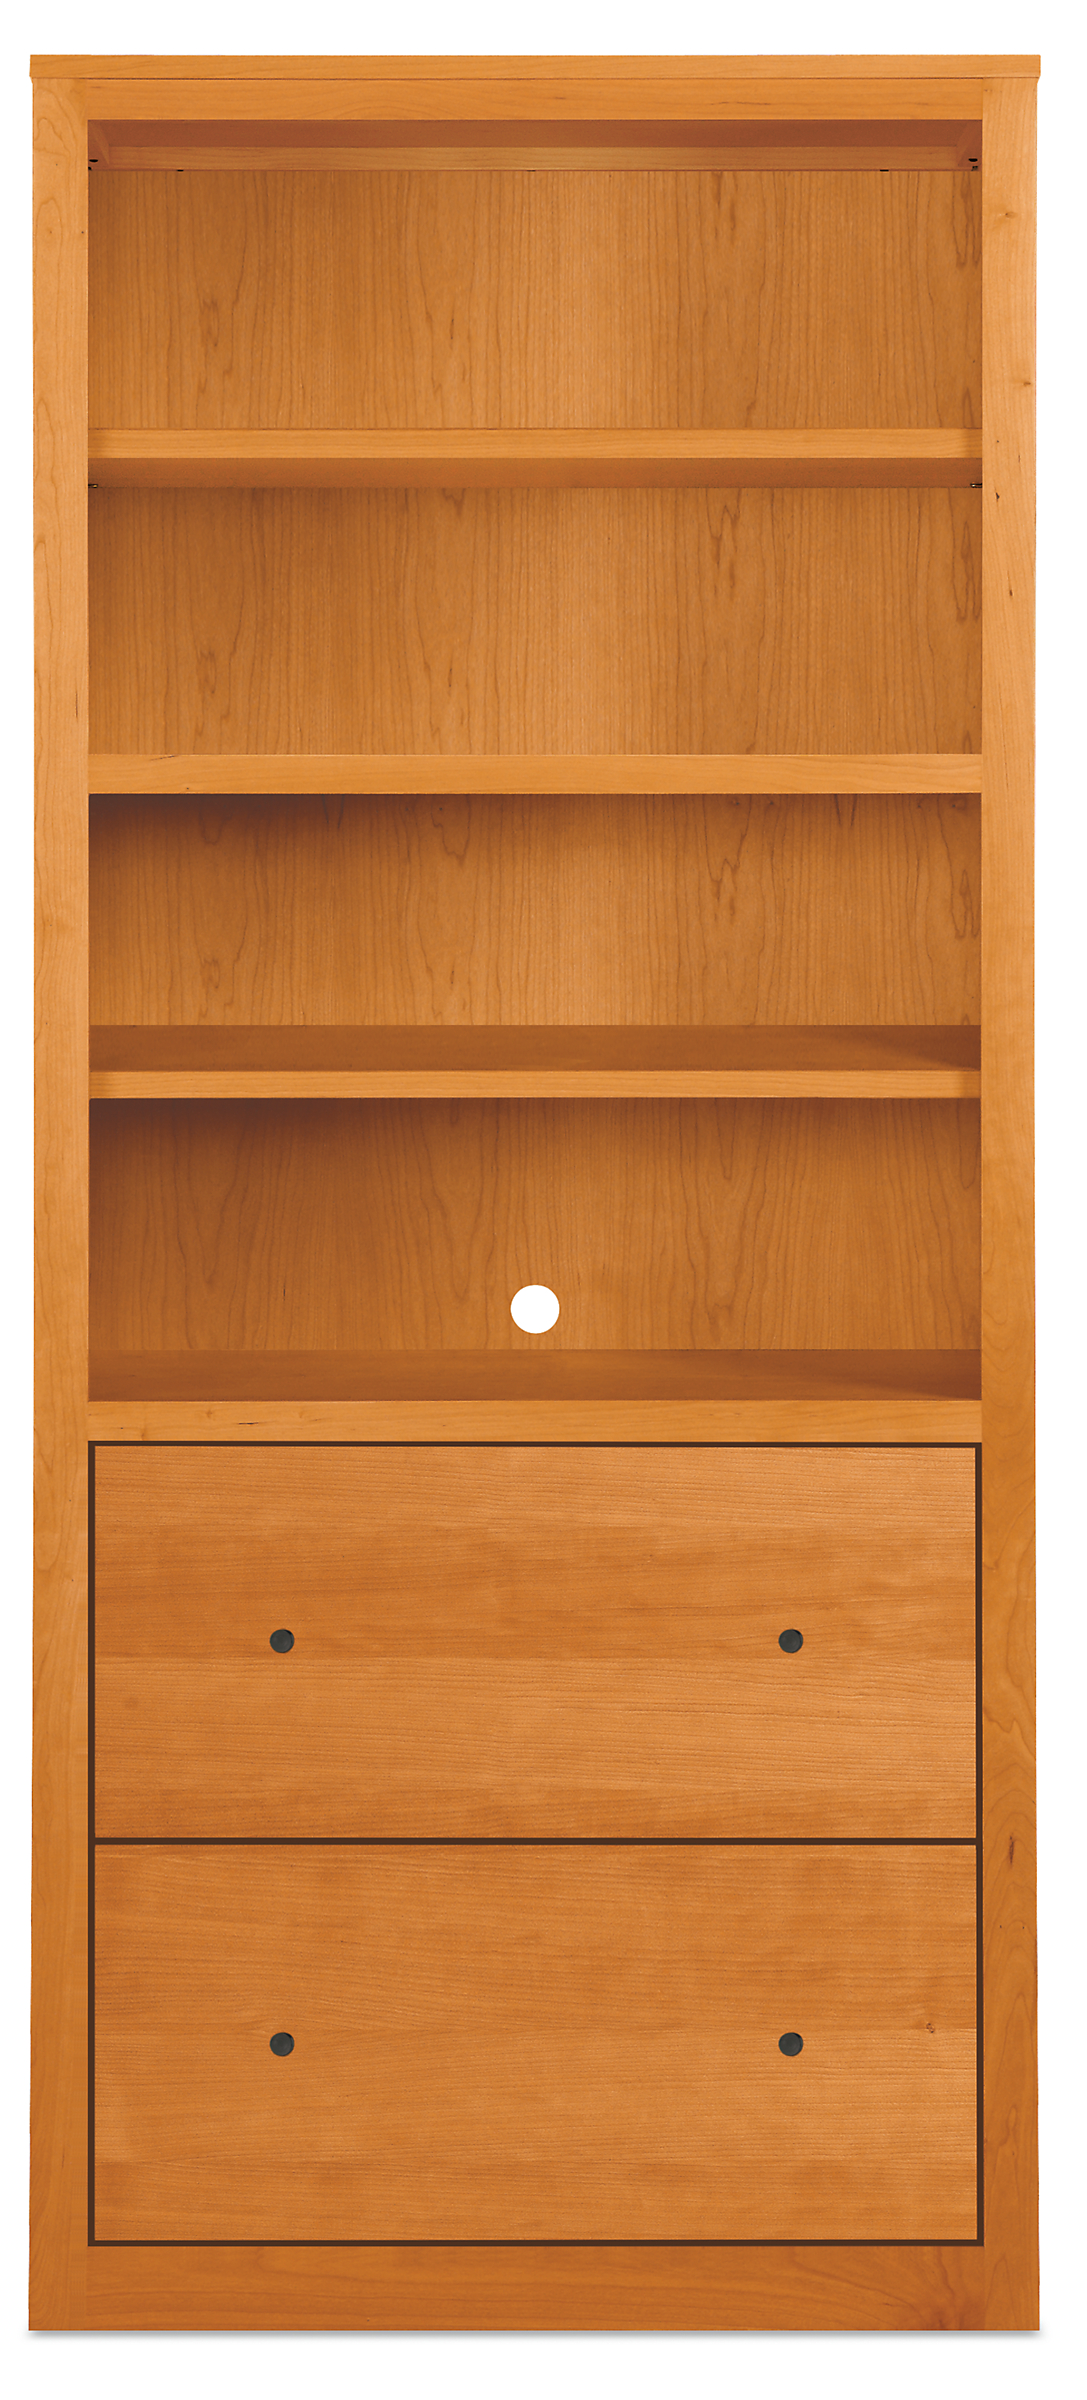 Woodwind 32w 17d 72h Two-File-Drawer Bookcase